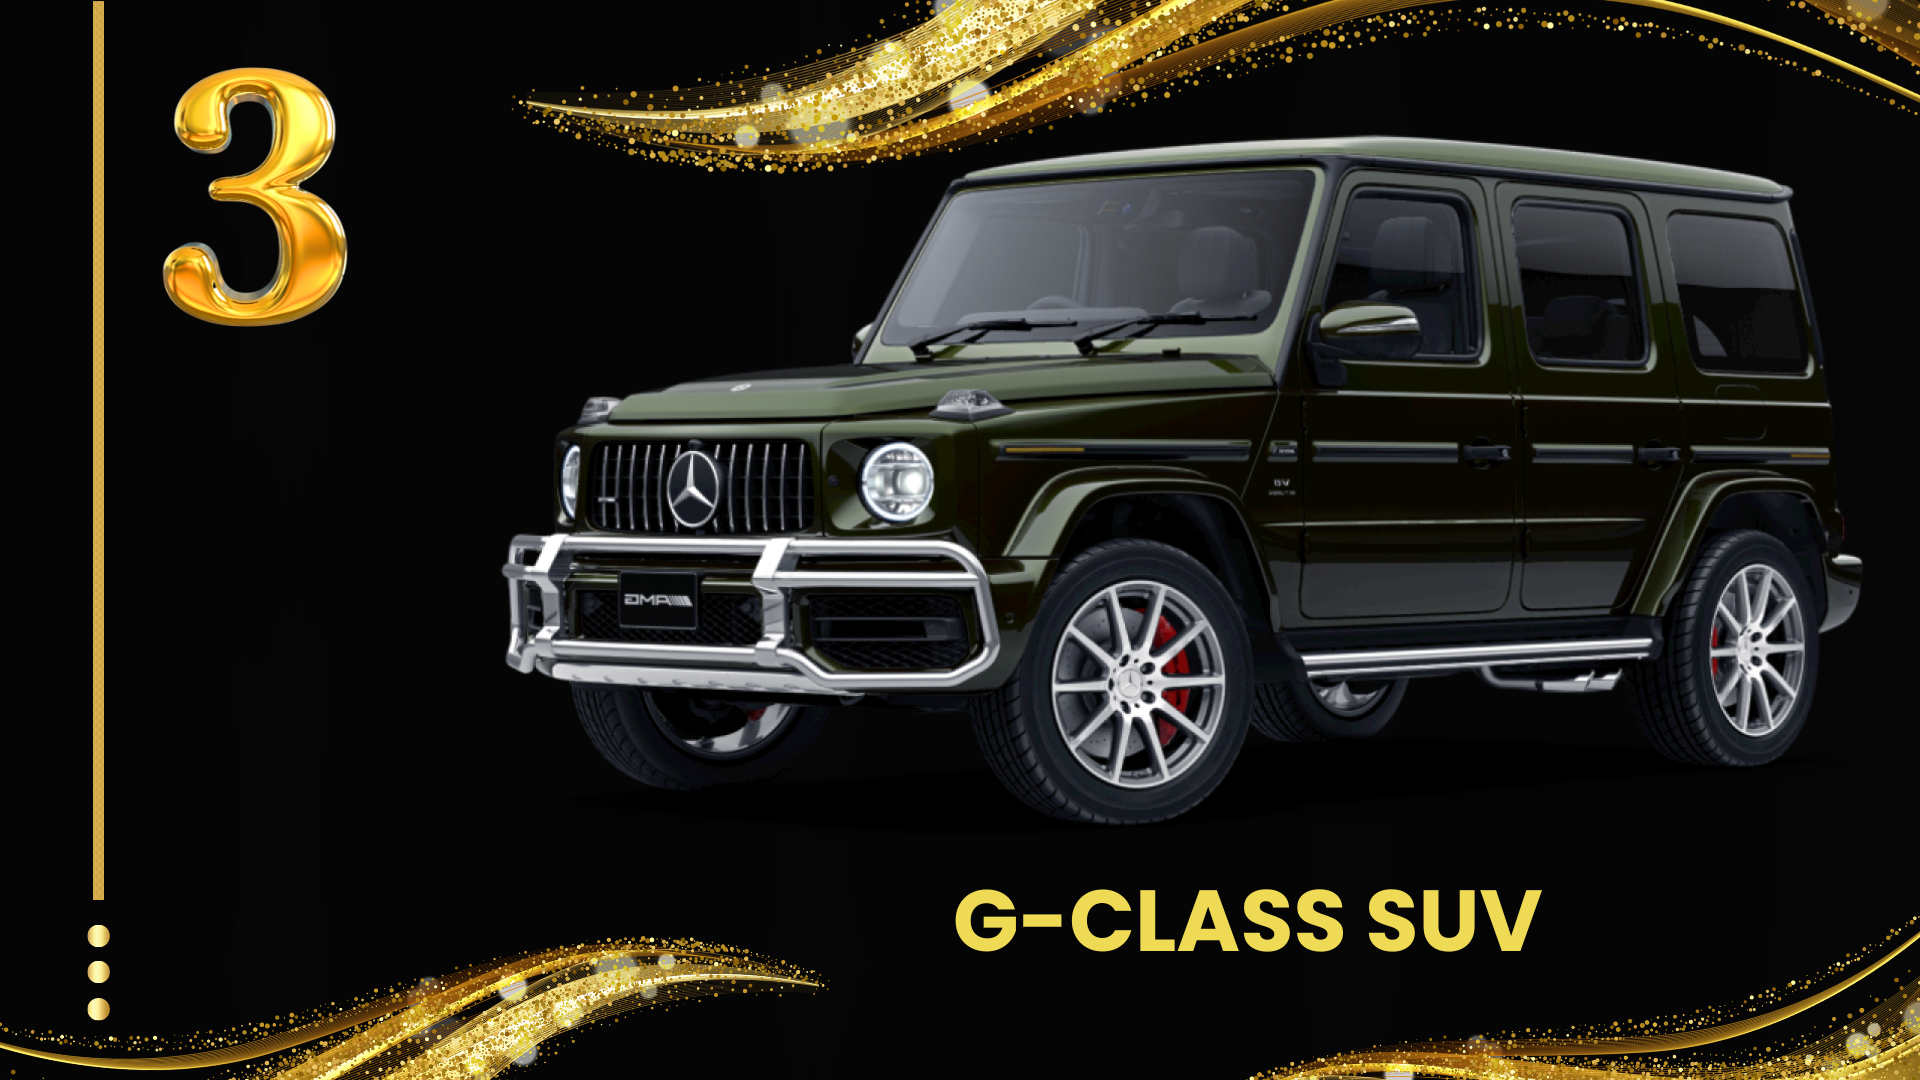 G Class qualifies for section 179 tax credit